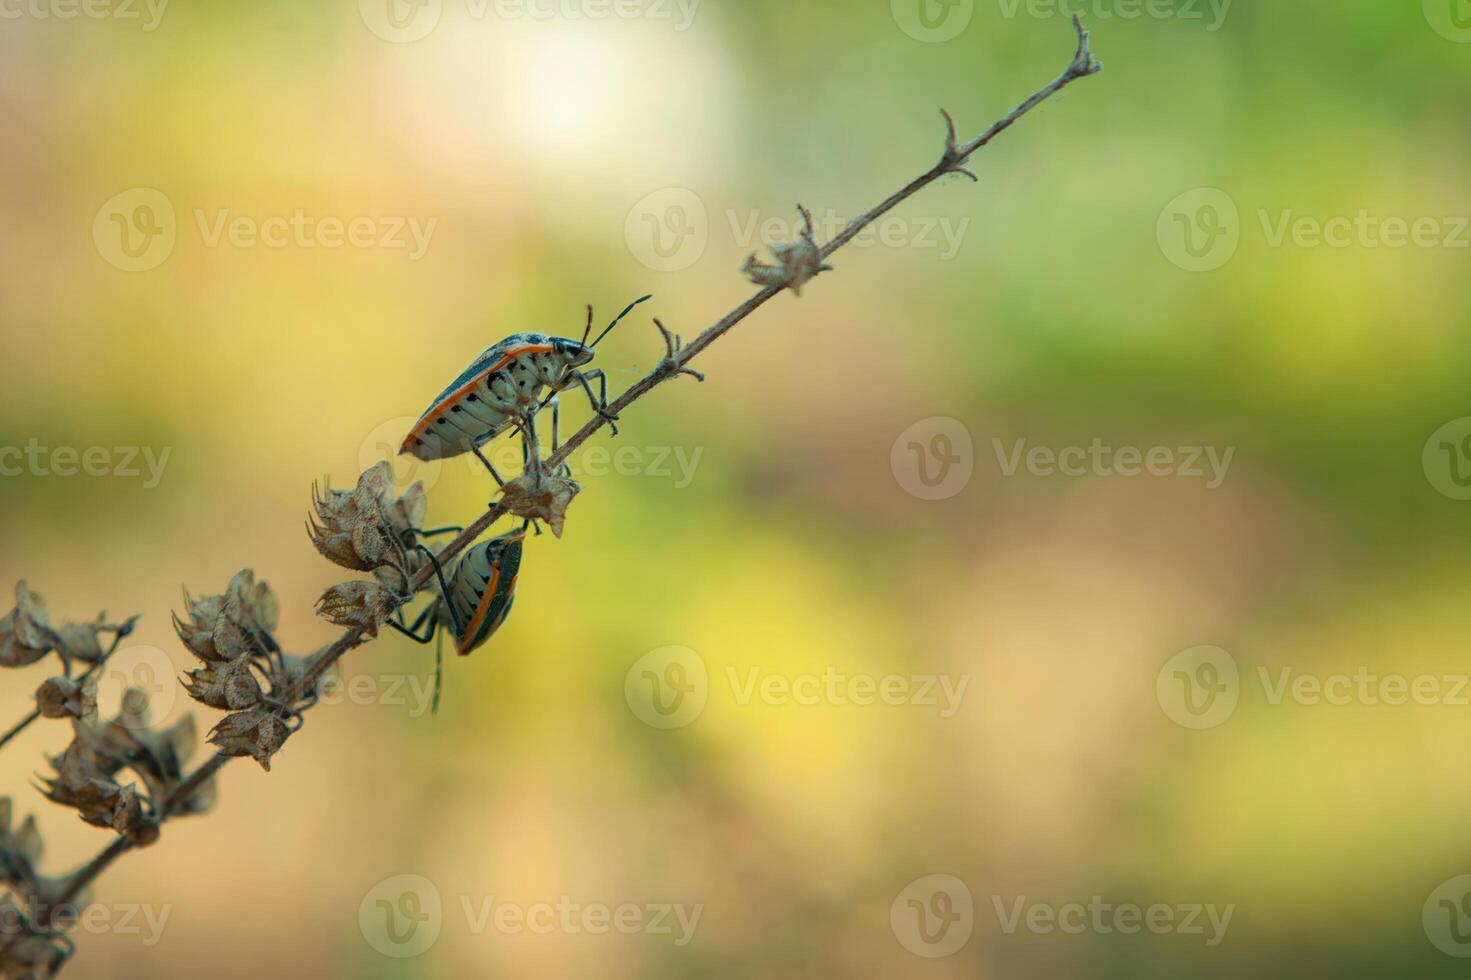 A Jewel Bug Scutelleridae is crawling on the branch of the bush photo